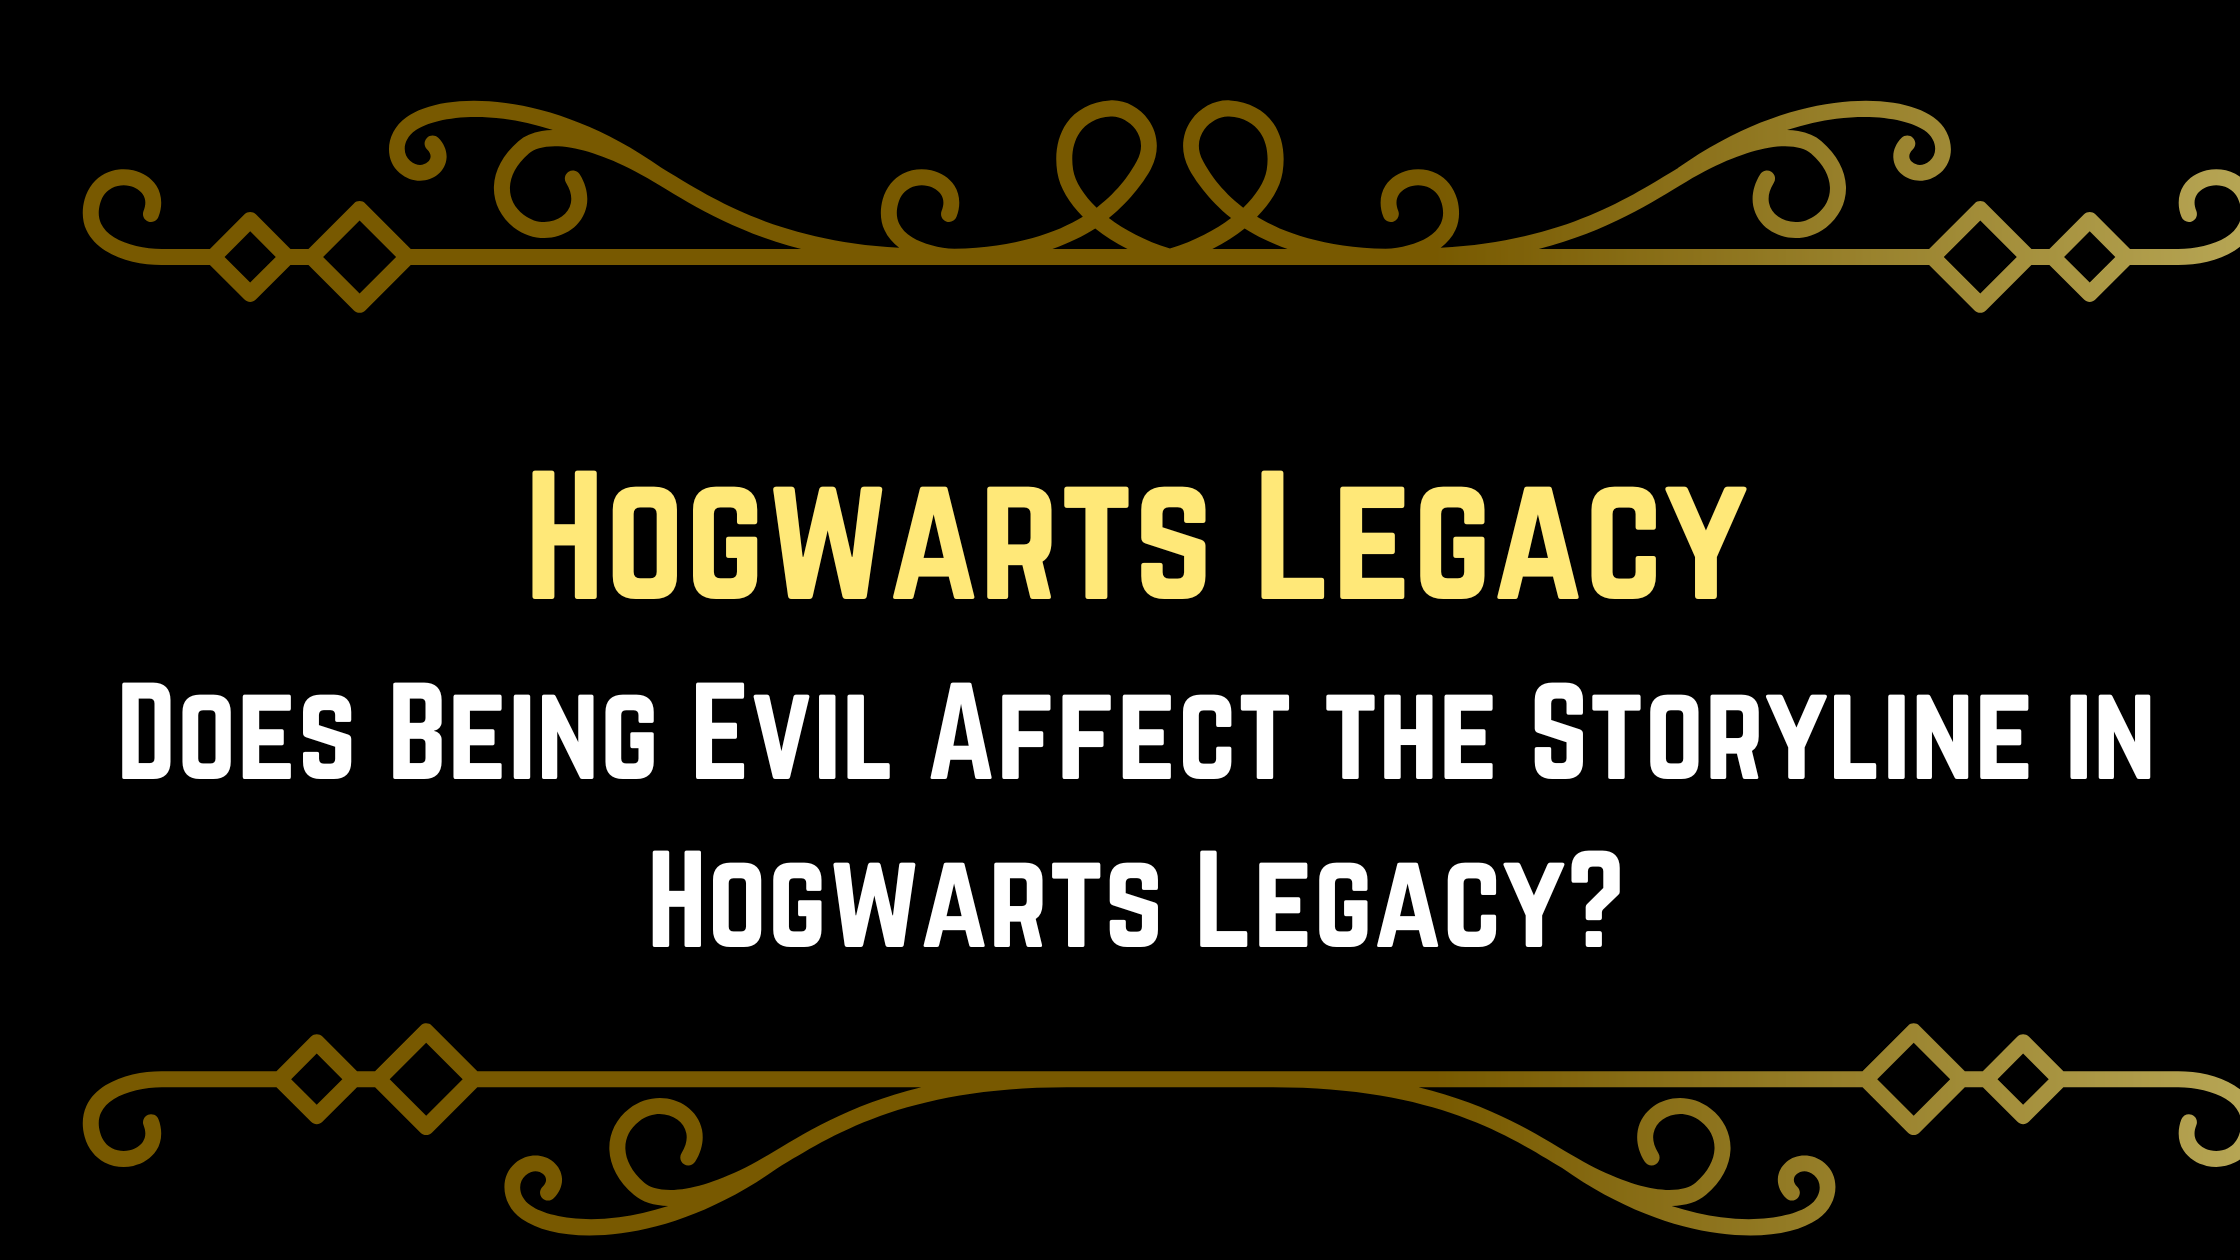 becoming evil in hogwarts legacy